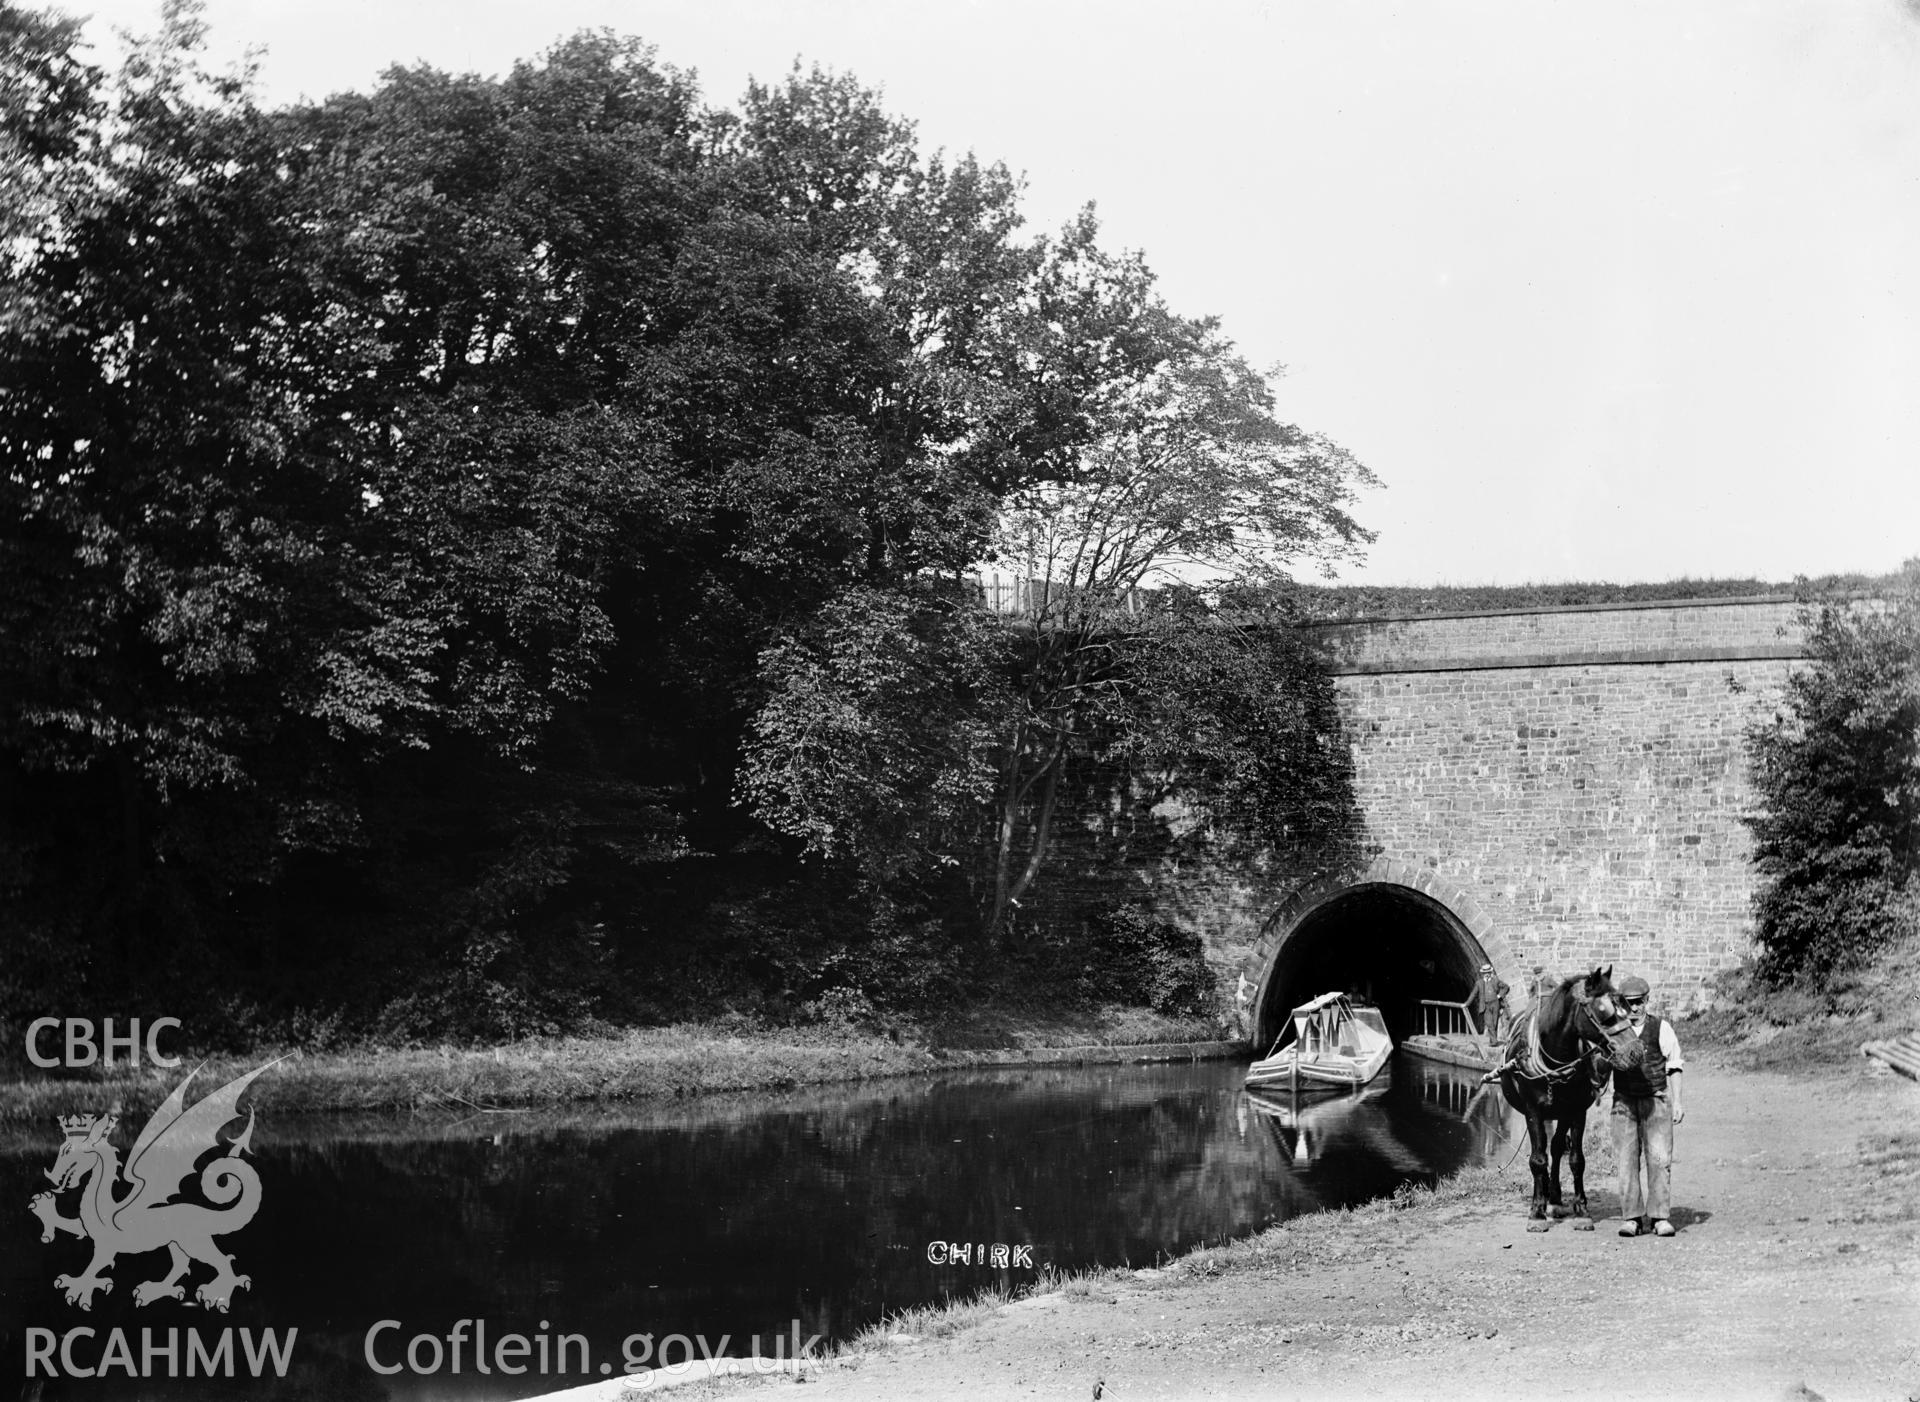 Black and white photograph showing the horse-drawn barge on the Llangollen Canal at the entrance to Chirk Tunnel, Denbighshire.